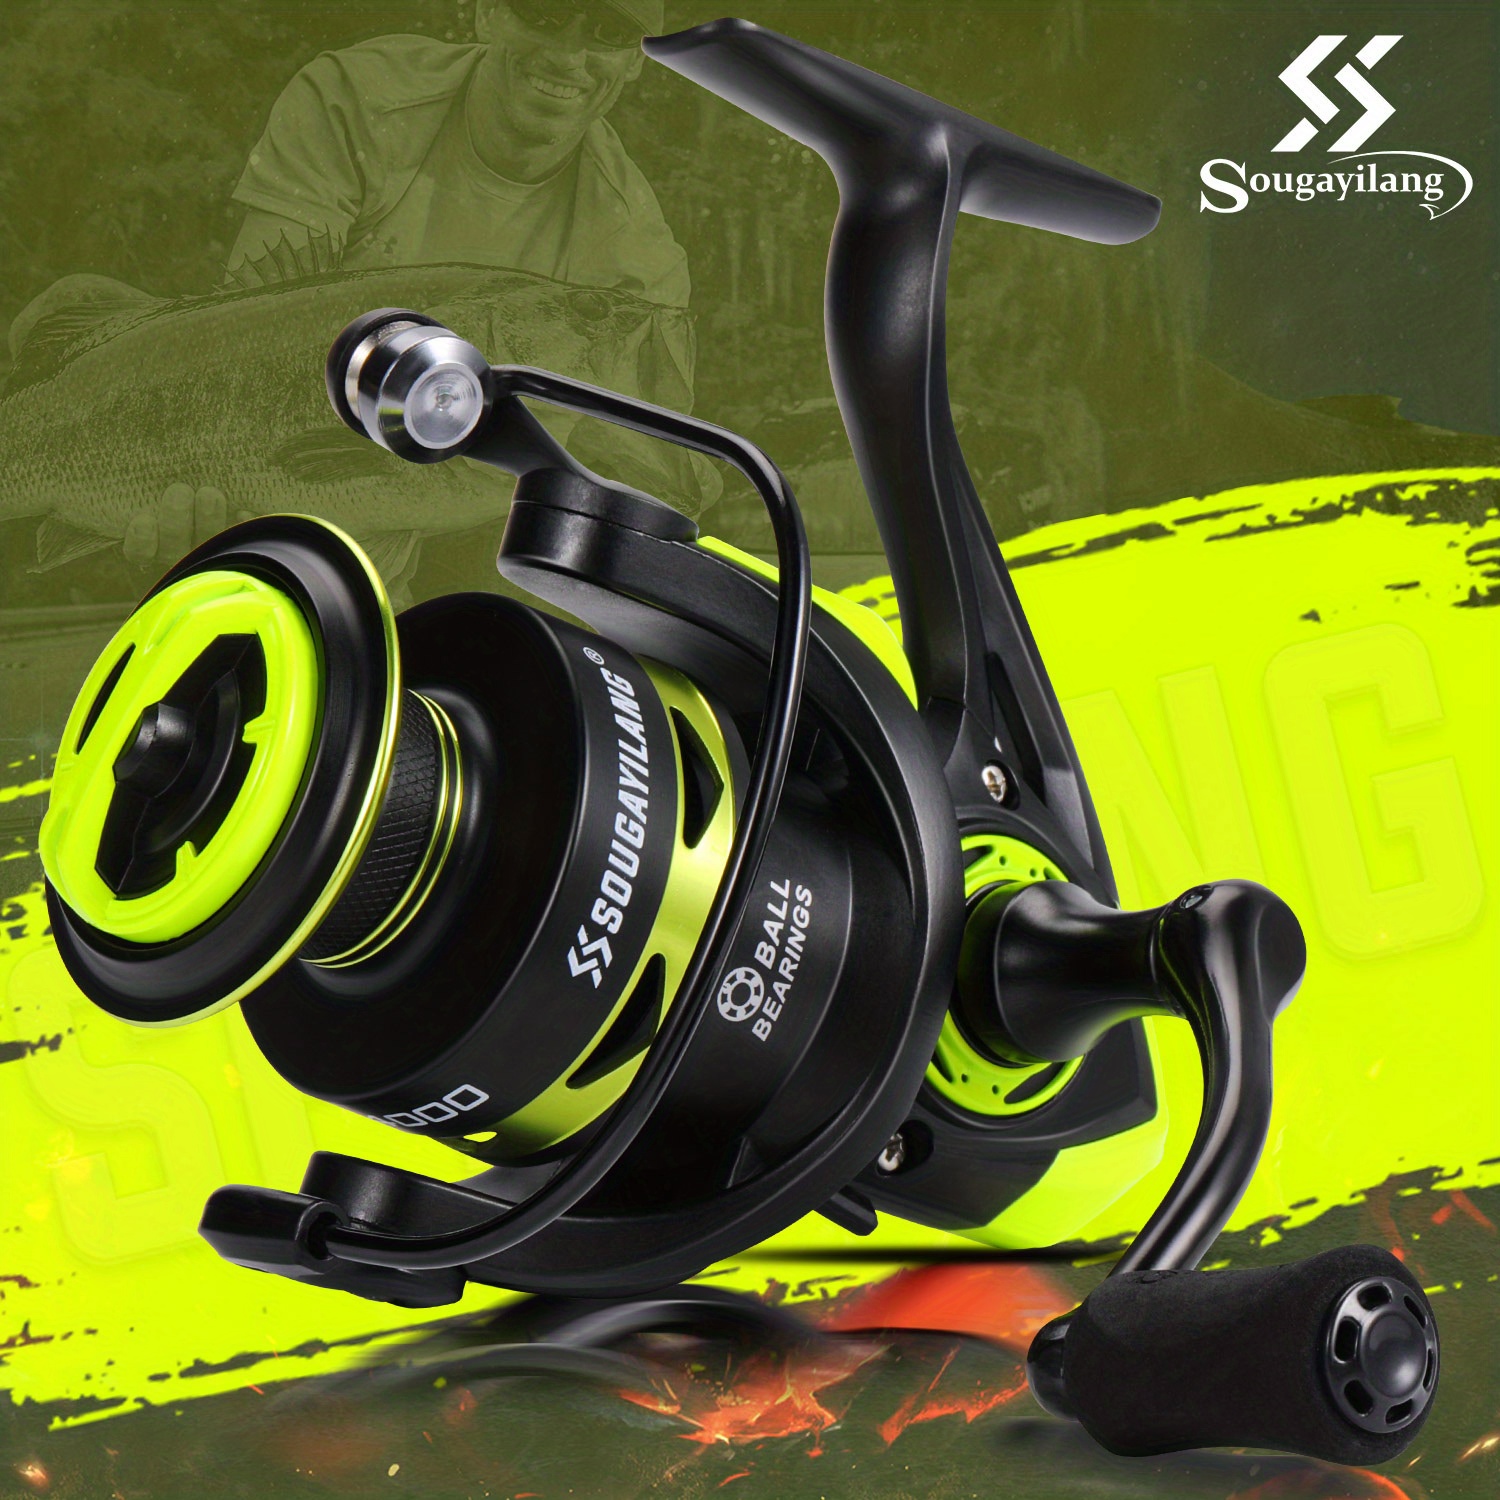 Sougayilang Stainless Steel Spinning Reel With Foldable EVA Handle, 5.2:1  Gear Ratio Fishing Reel With 20lb/9kg Max Drag, Fishing Tackle For Bass Catf